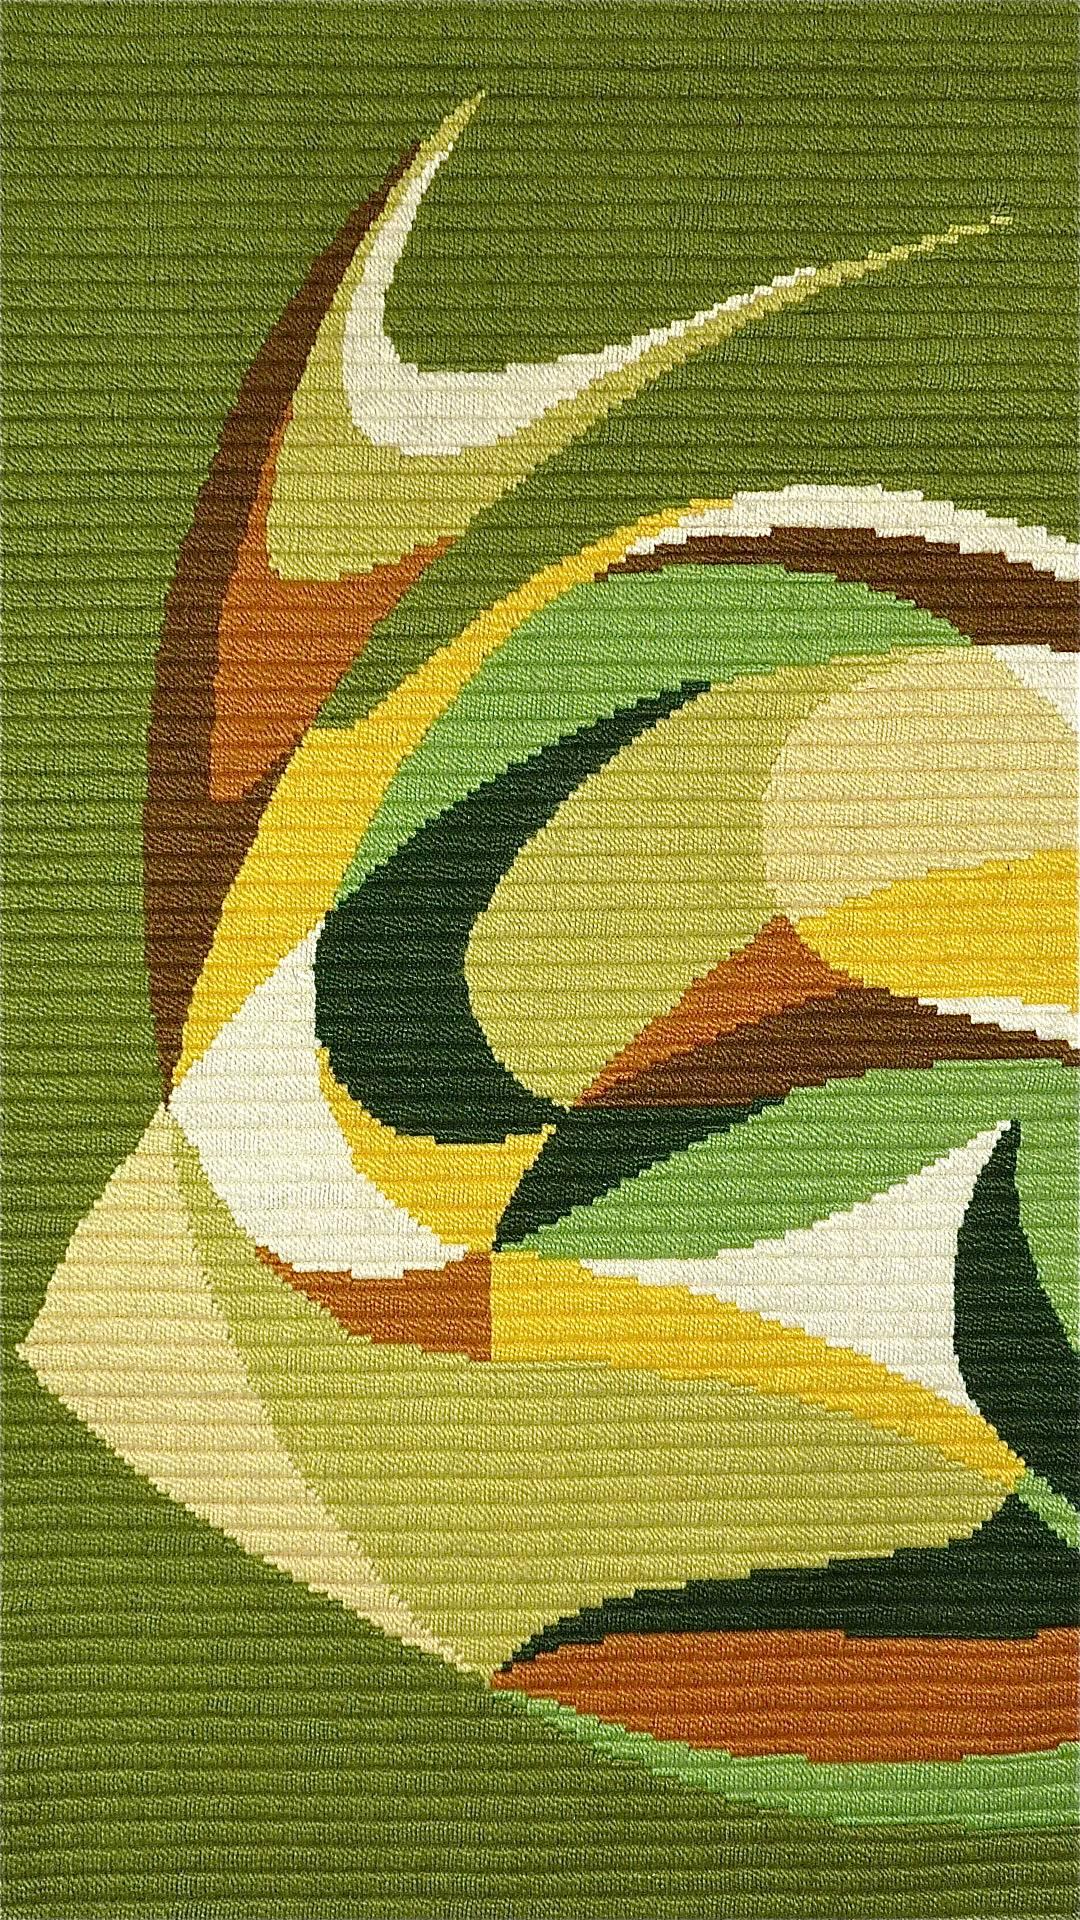 Fantastic Danish, probably Rya midcentury design flat-weave rug / wall-hanging or carpet made circa 1950-1960. The hand-woven wool wall hanging has a colorful abstract modern design in colors yellow, beige, different kind of green, curry and brown